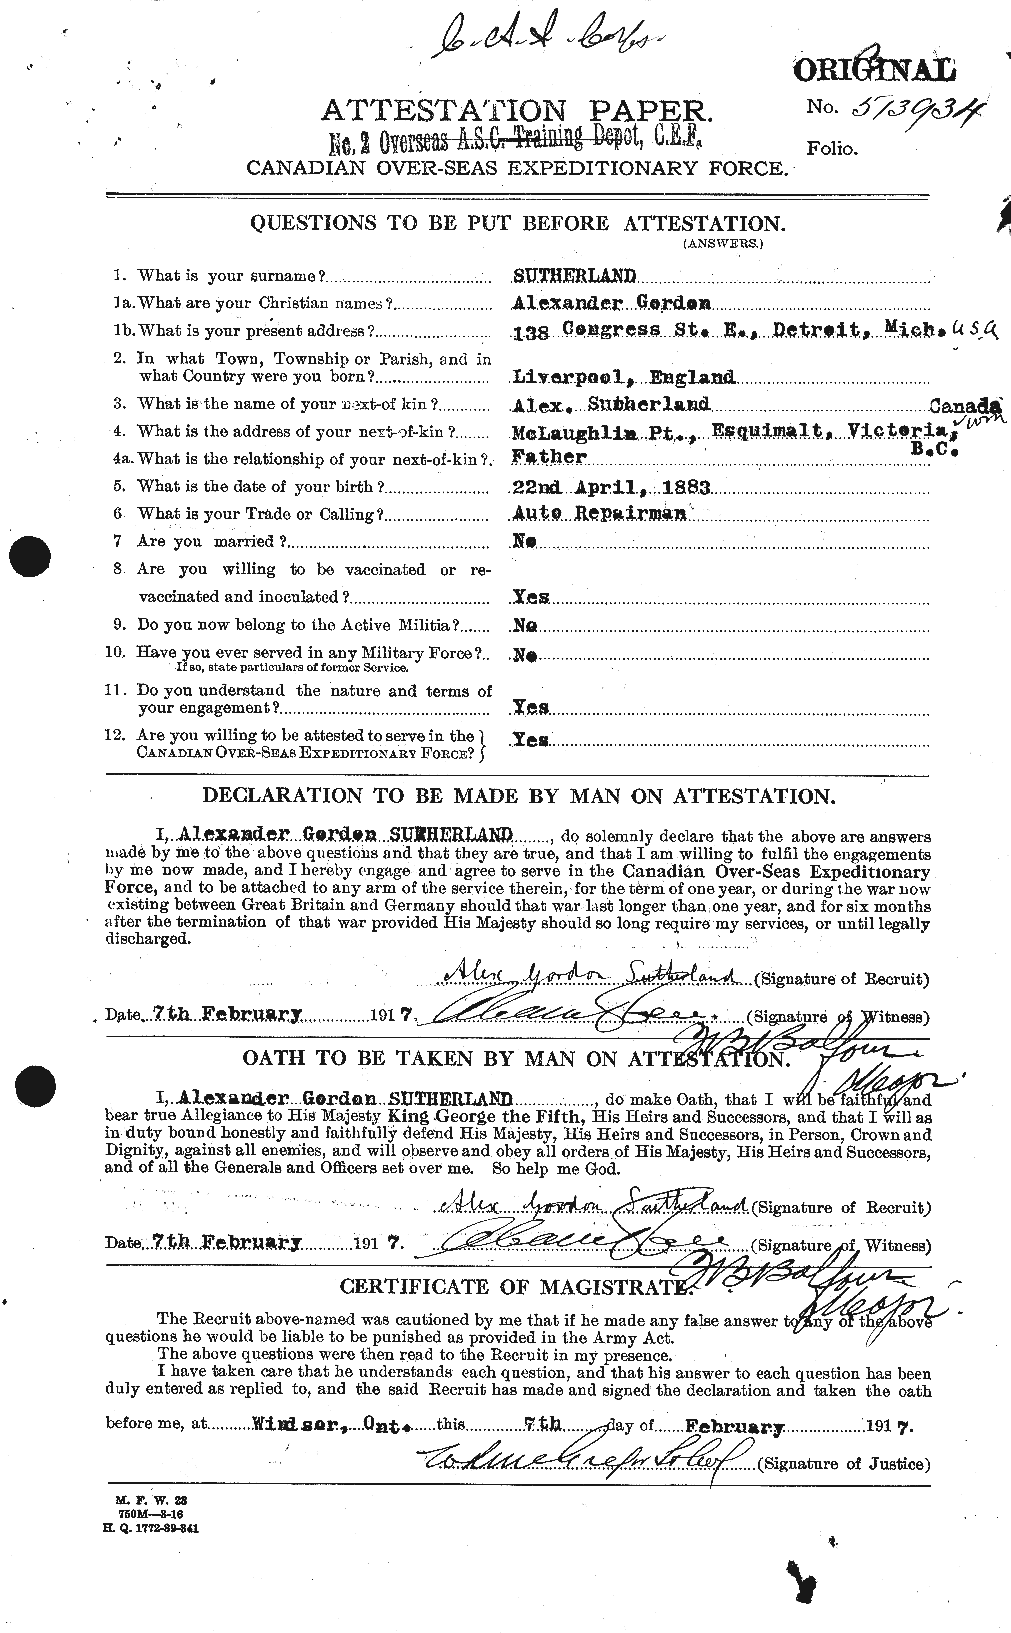 Personnel Records of the First World War - CEF 125349a